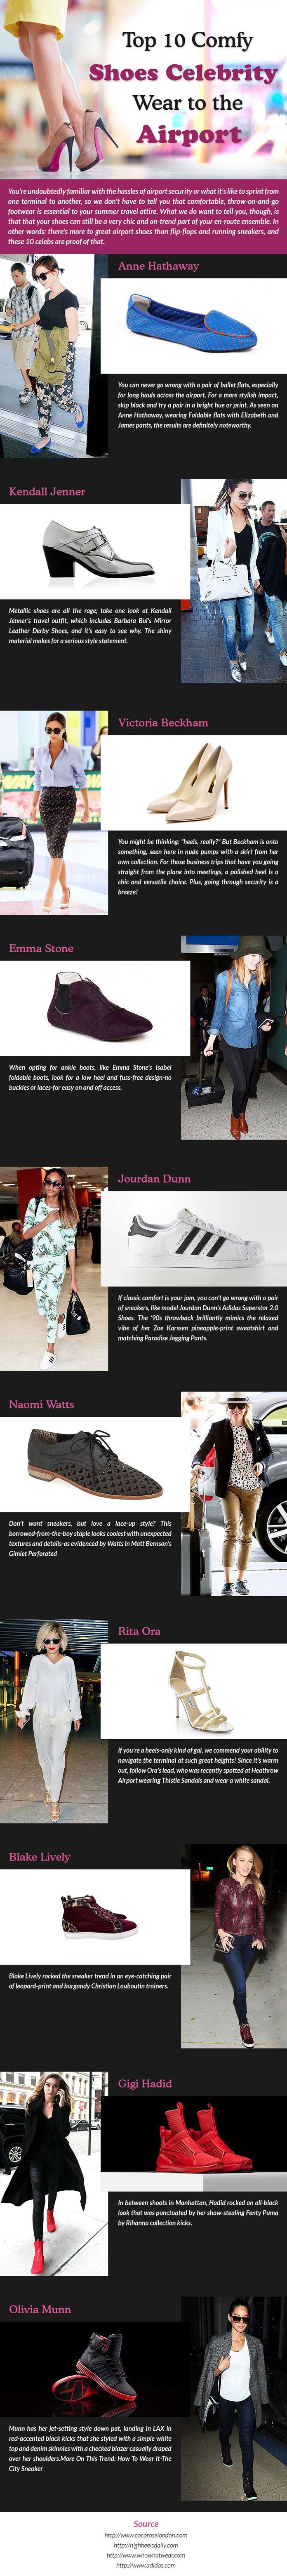 Top-10-Comfy-Shoes-Celebrity-Wear-to-The-Airport